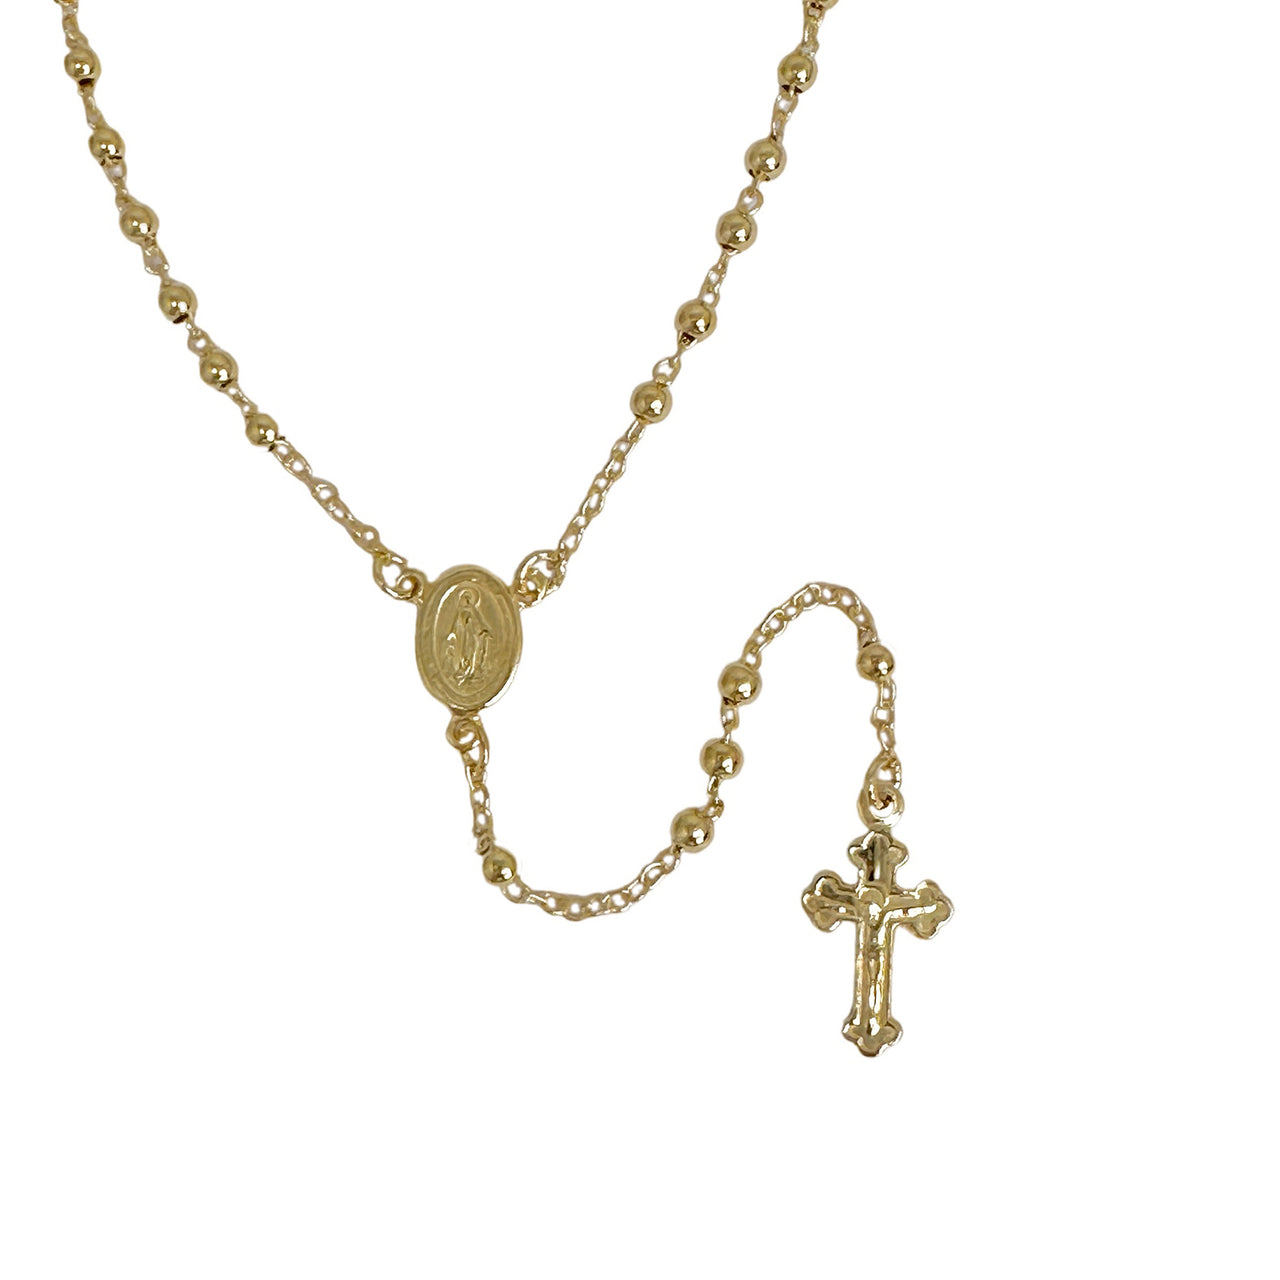 Love, Lisa Favorite Rosary Necklace